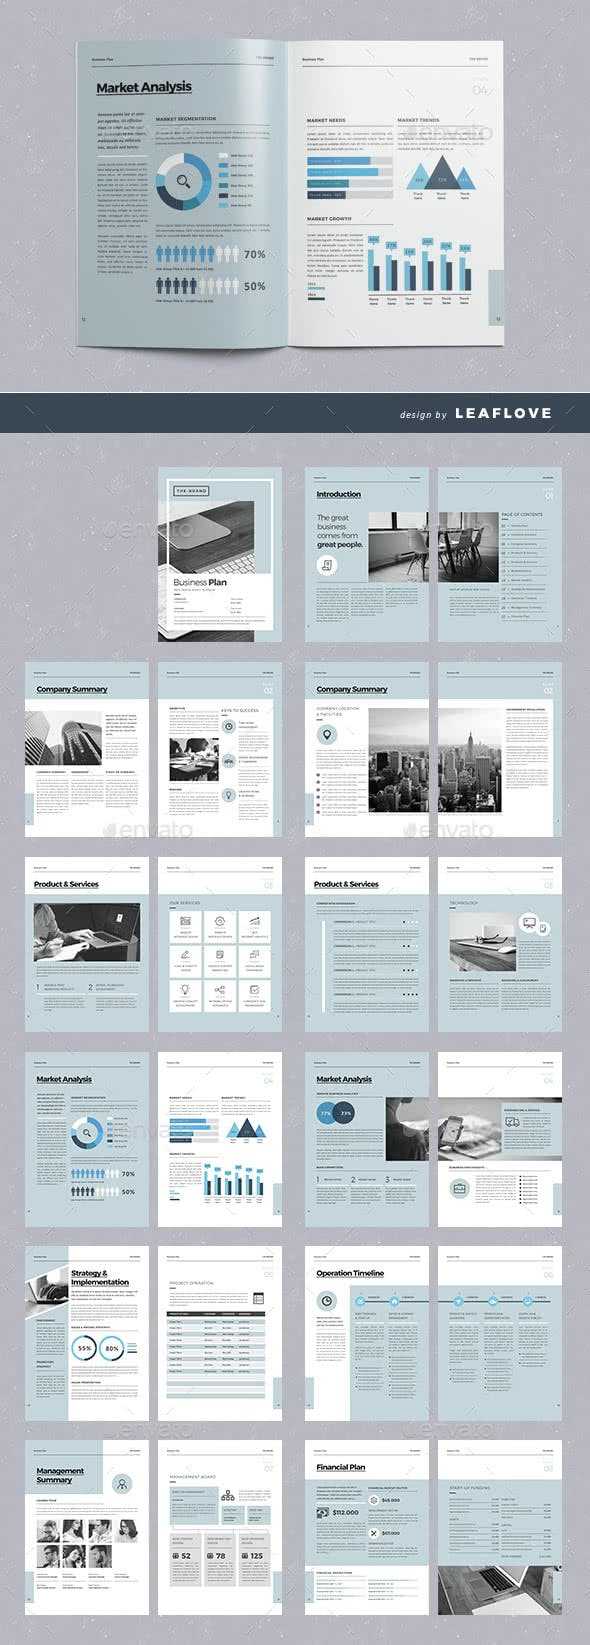 75 Fresh Indesign Templates And Where To Find More Throughout Free Indesign Report Templates